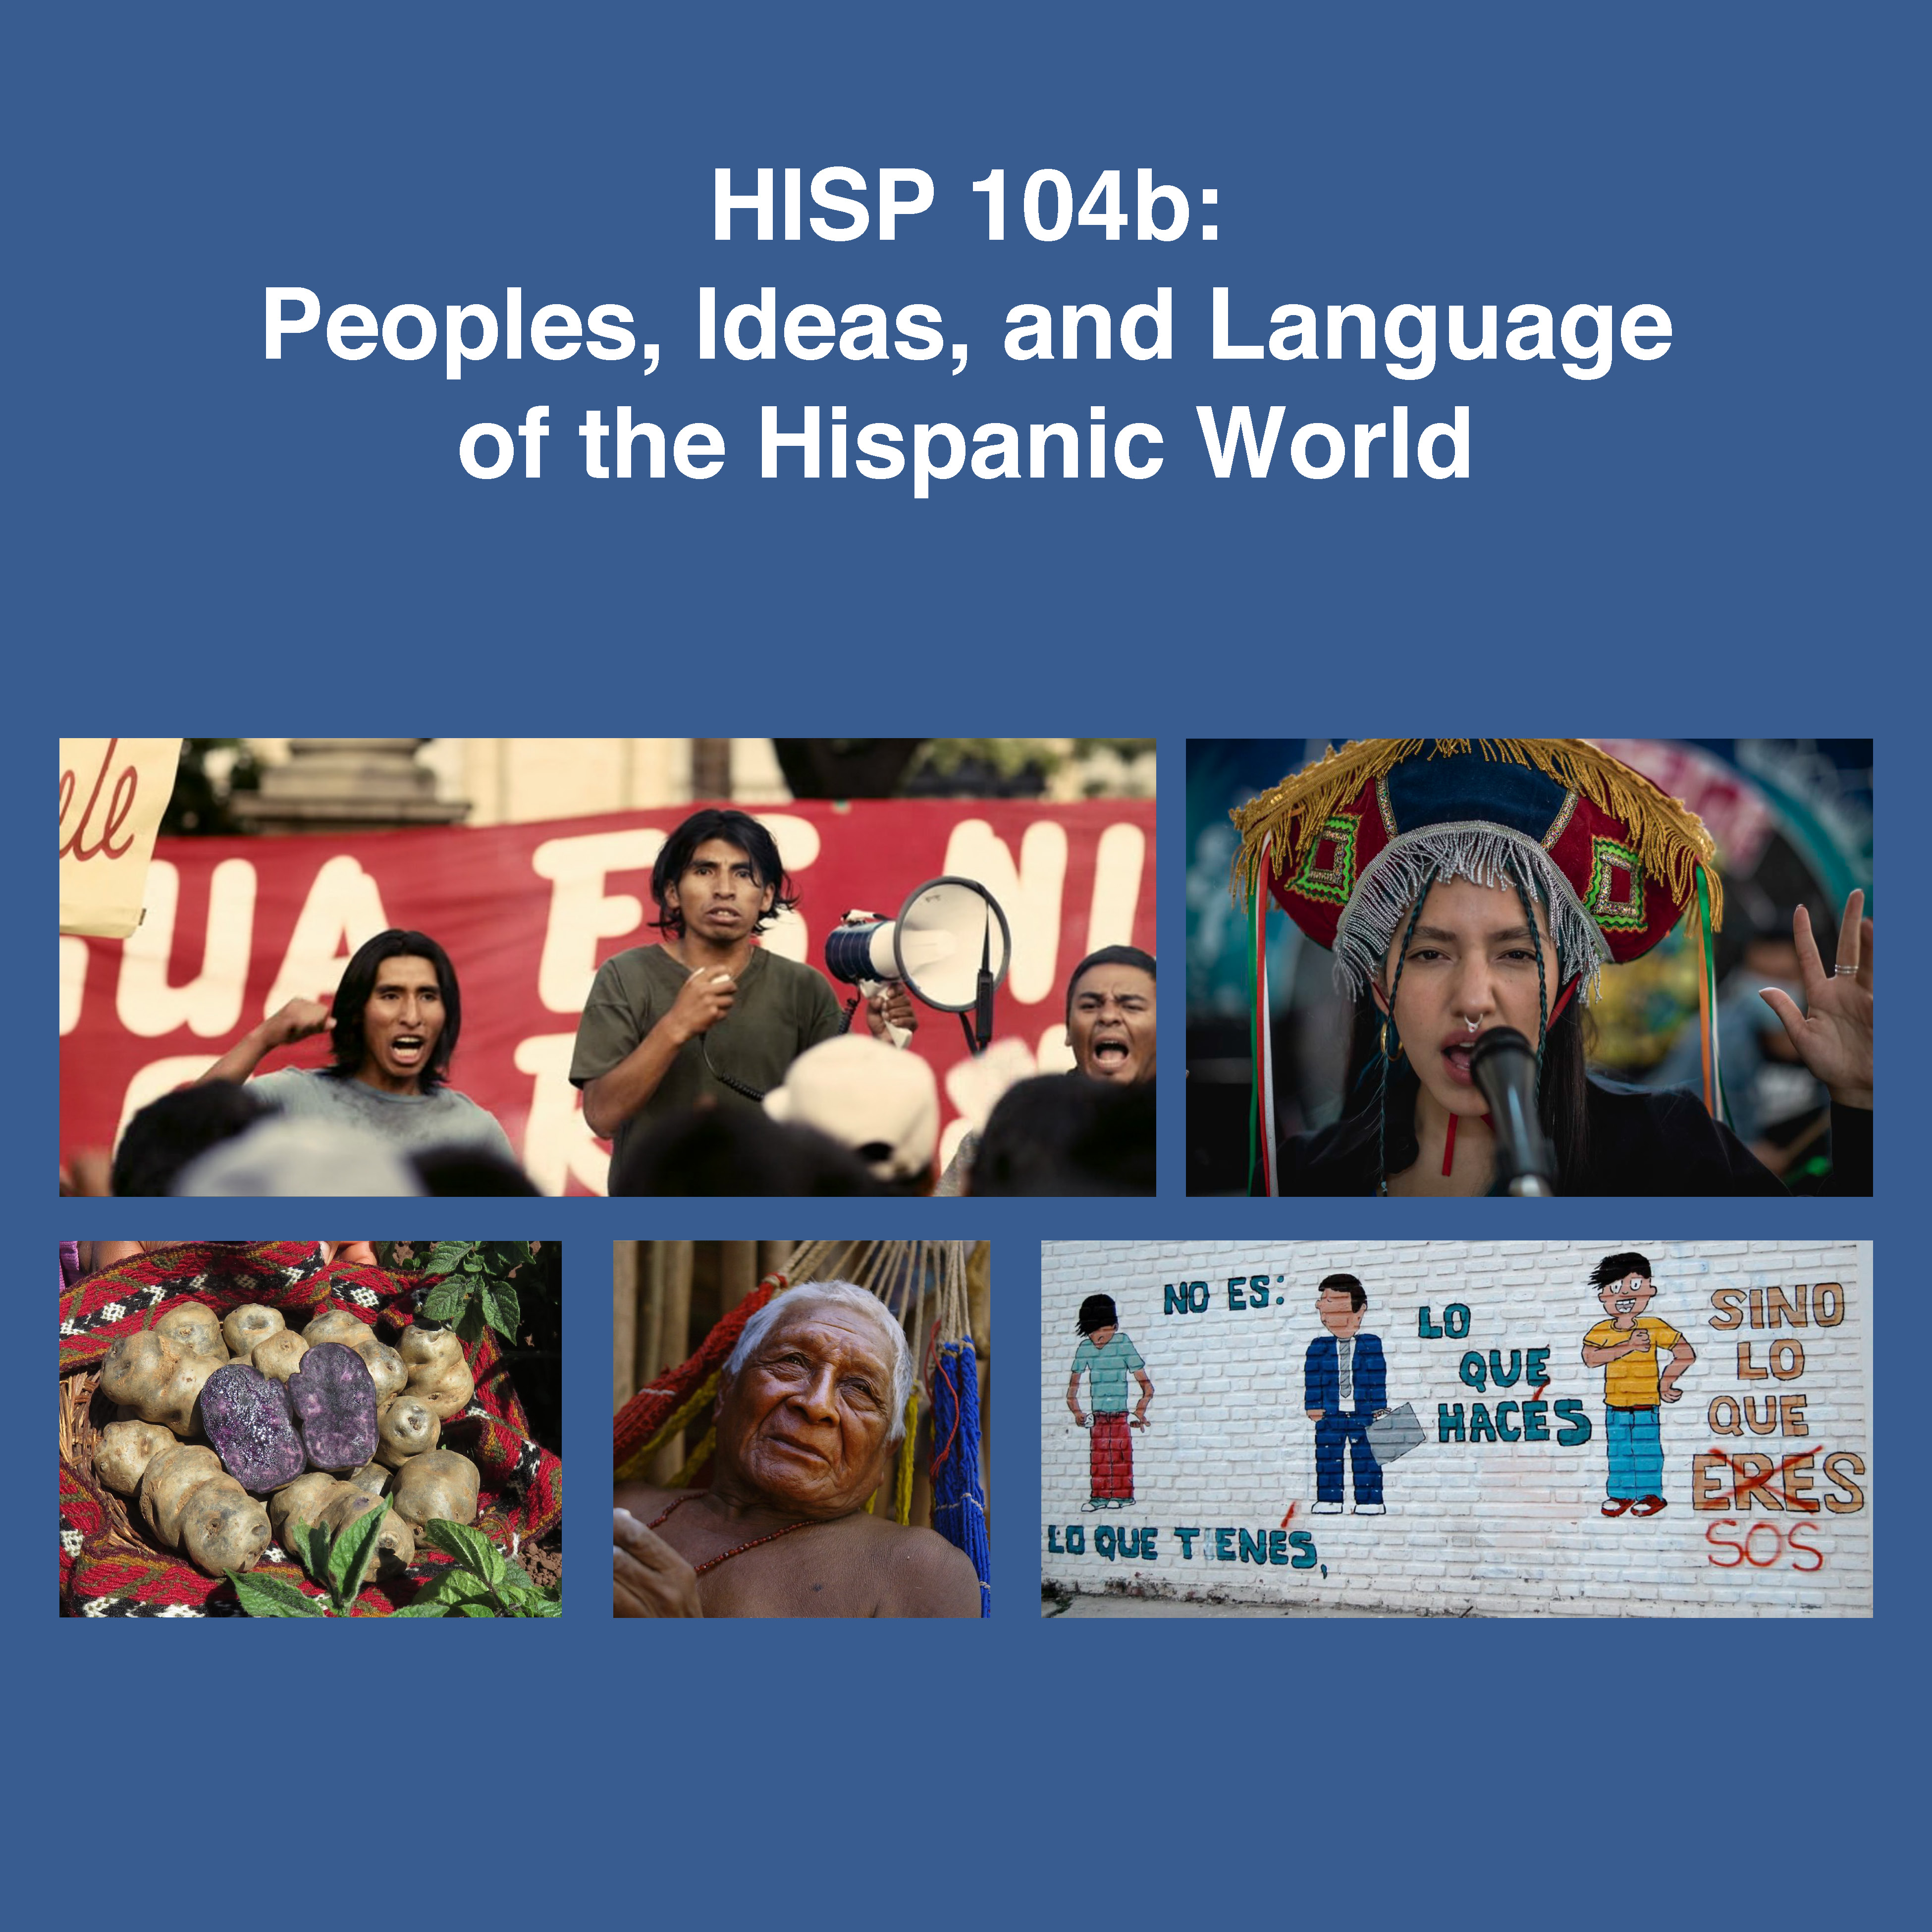 On blue background: HISP 104b: Peoples, Ideas, and Language of the Hispanic World. Image 1: a rally of indigenous peoples, 3 of whom face us in front of banner. One has loudspeaker, the other two cheer.  Image 2: cover for “Bebe diferentemente iguales” a song. Image 3: two dancers in vibrantly colored clothing, the woman in ruffles. Image 4: from the film, La Buena vida, of old man lying in hammock. Image 5: brick wall painted white with 3 cartoon figures. The words on wall read: No es: lo que tienes, Lo que haces sino lo que eres which is crossed out and replaced by sos.